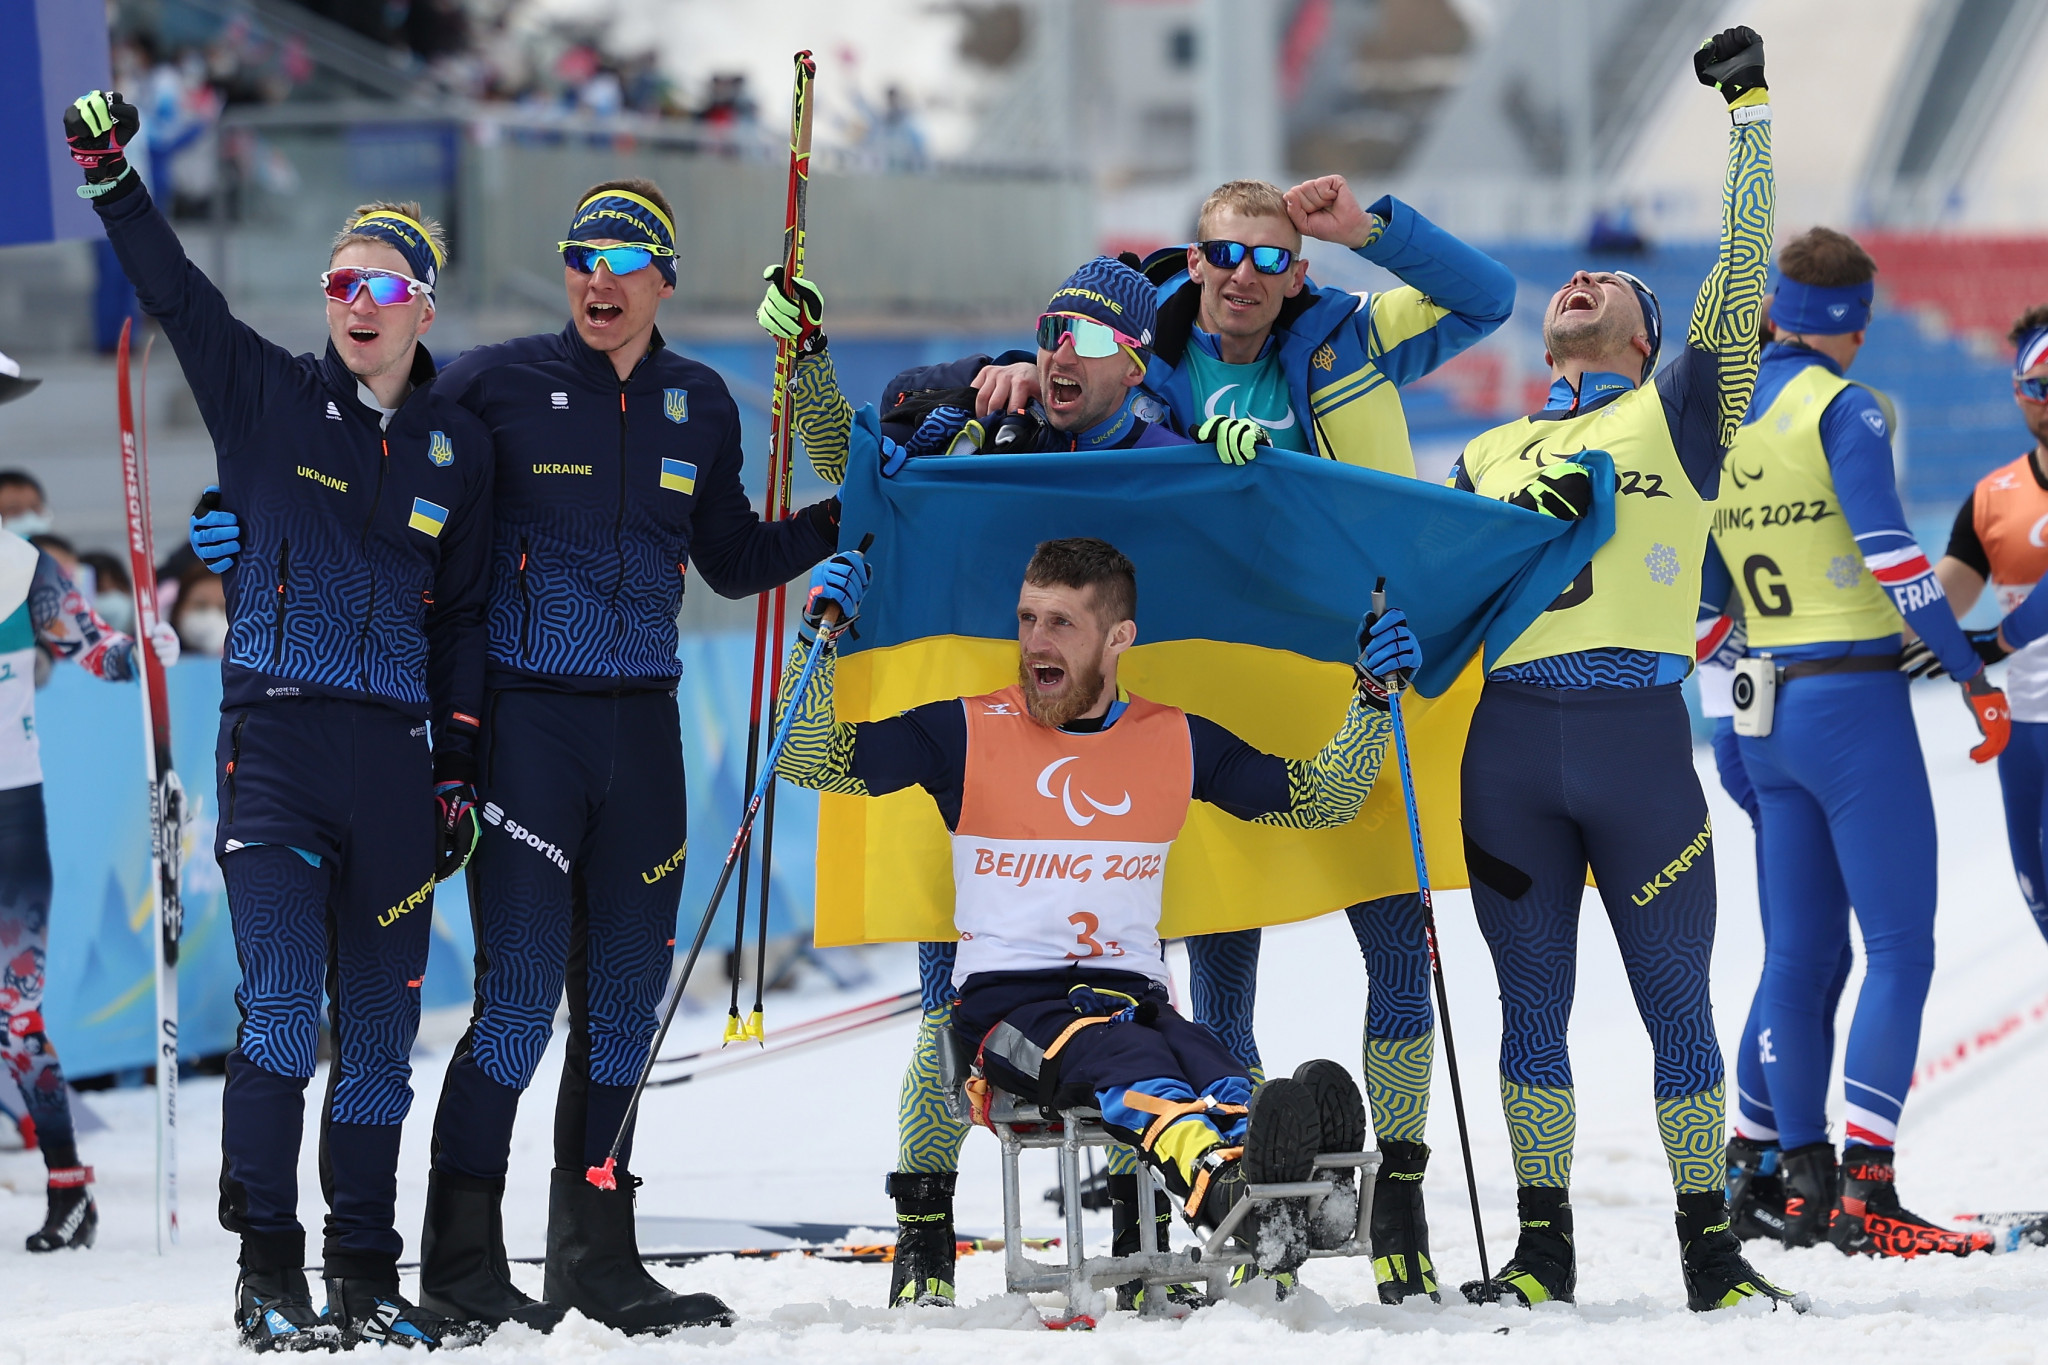 Ukraine made up for a disappointing result in the mixed relay by taking gold in the open ©Getty Images